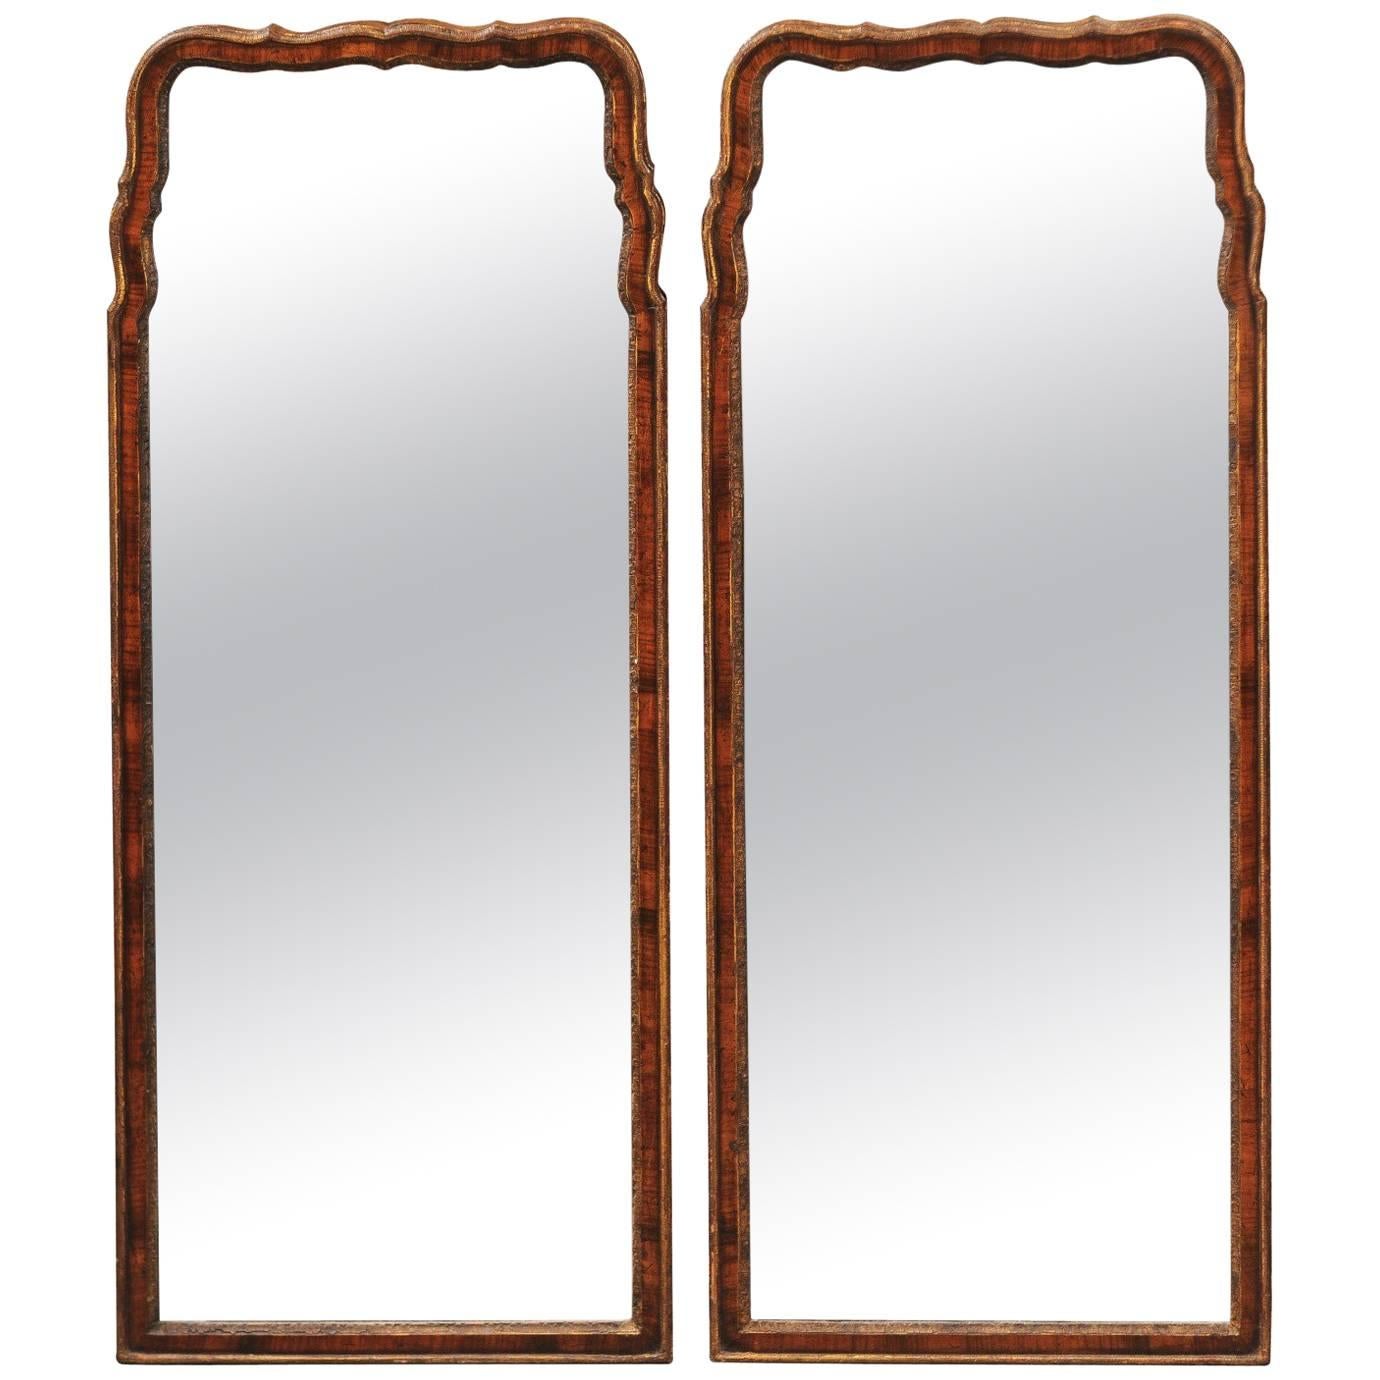 Pair of English Late 19th Century Queen Anne Style Burled Walnut Mirrors